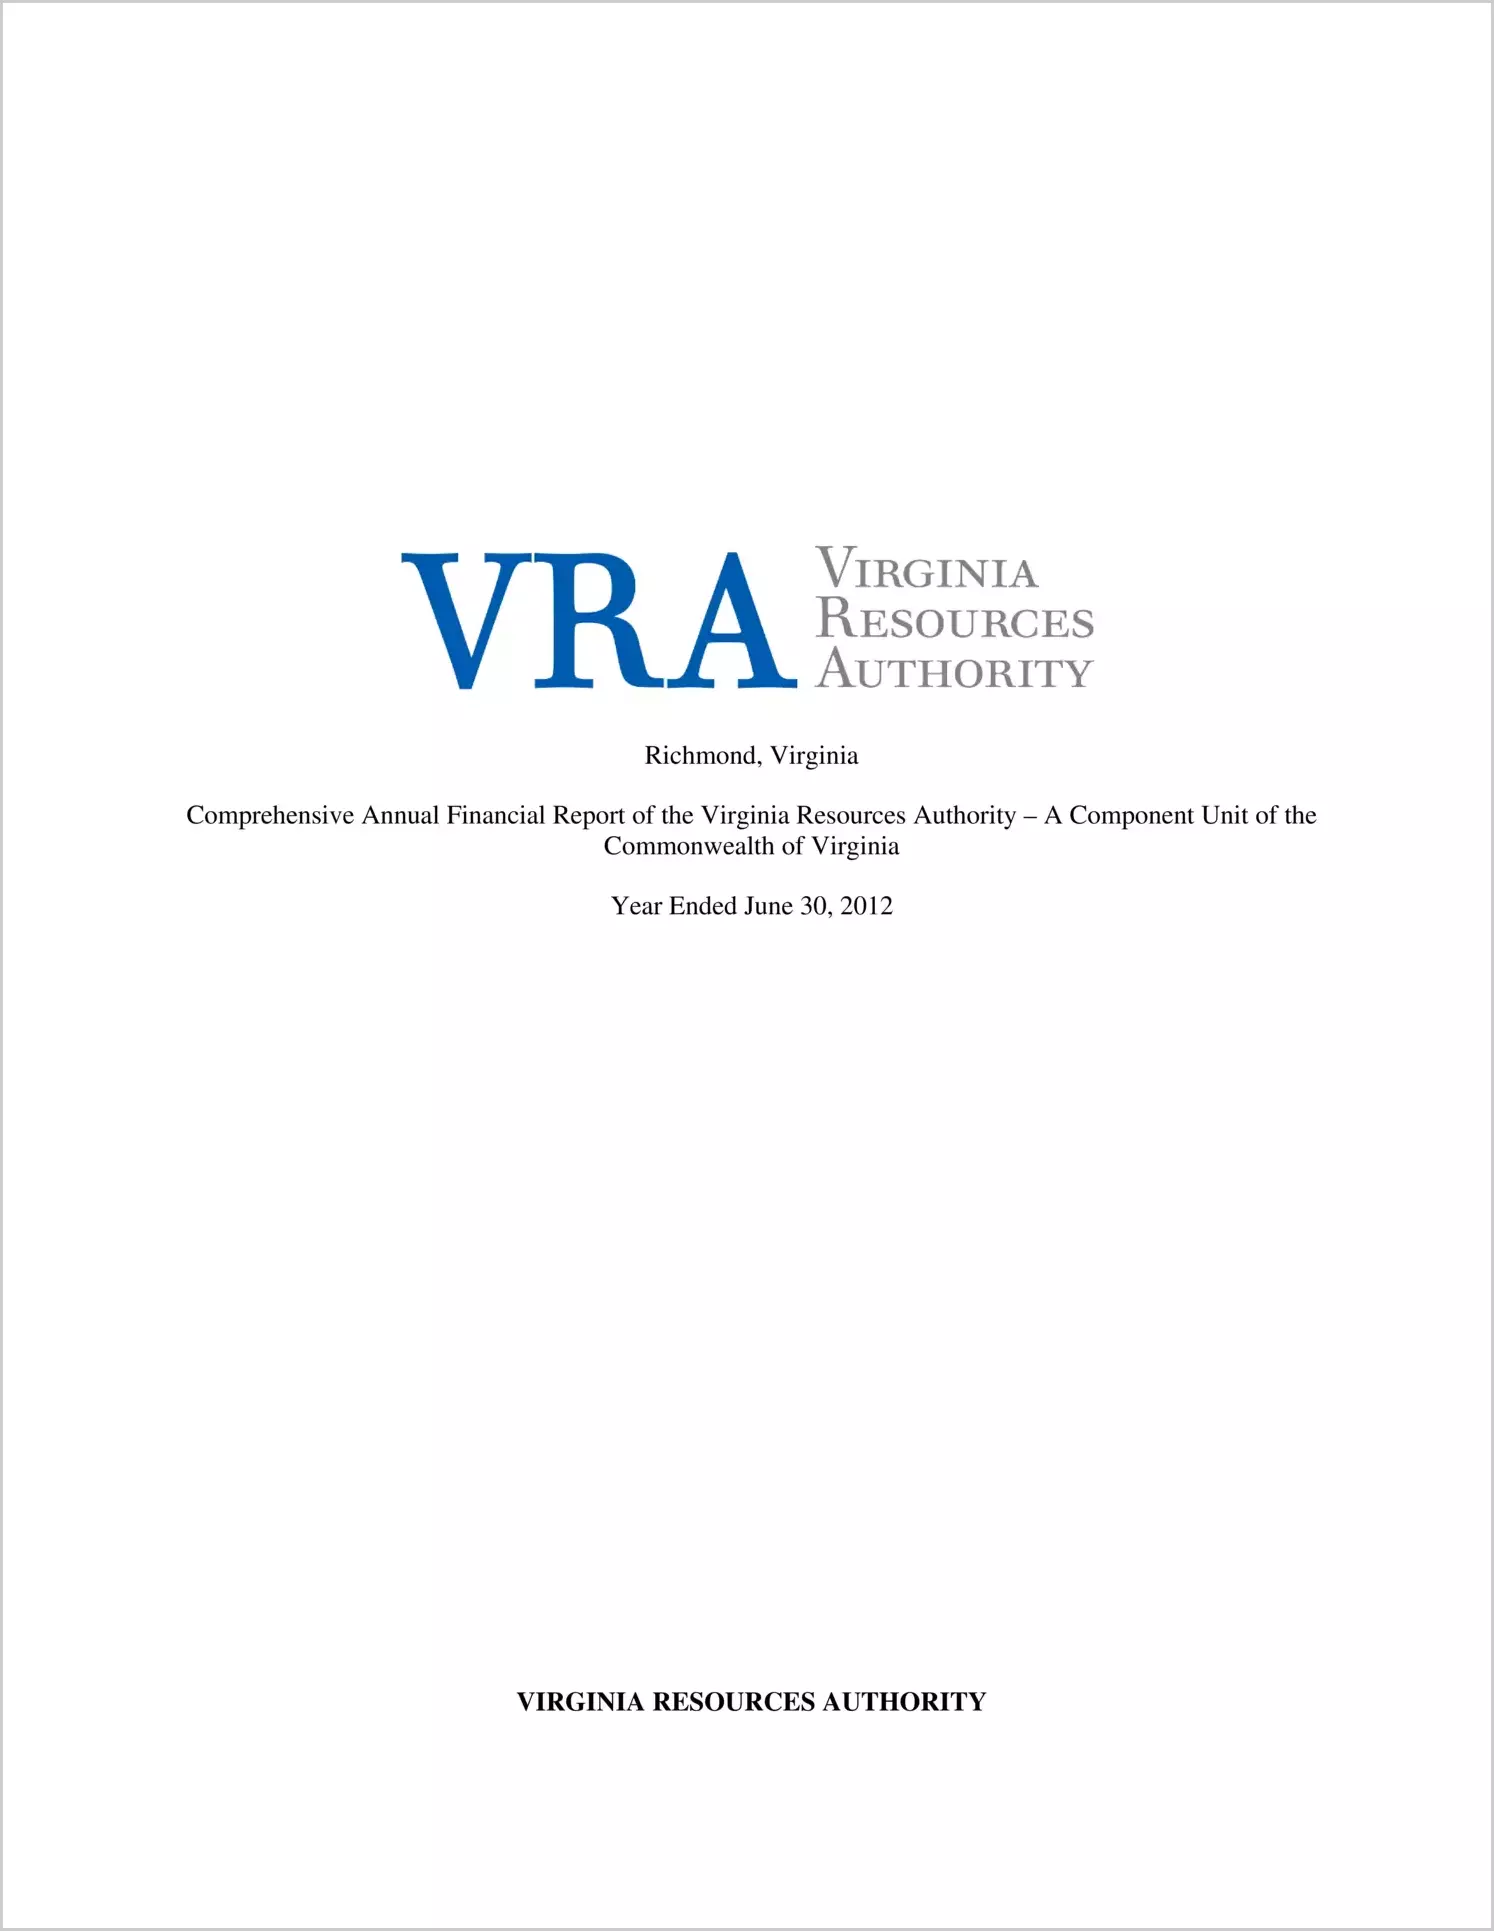 Virginia Resources Authority Financial Statements for the fiscal year ended June 30, 2012